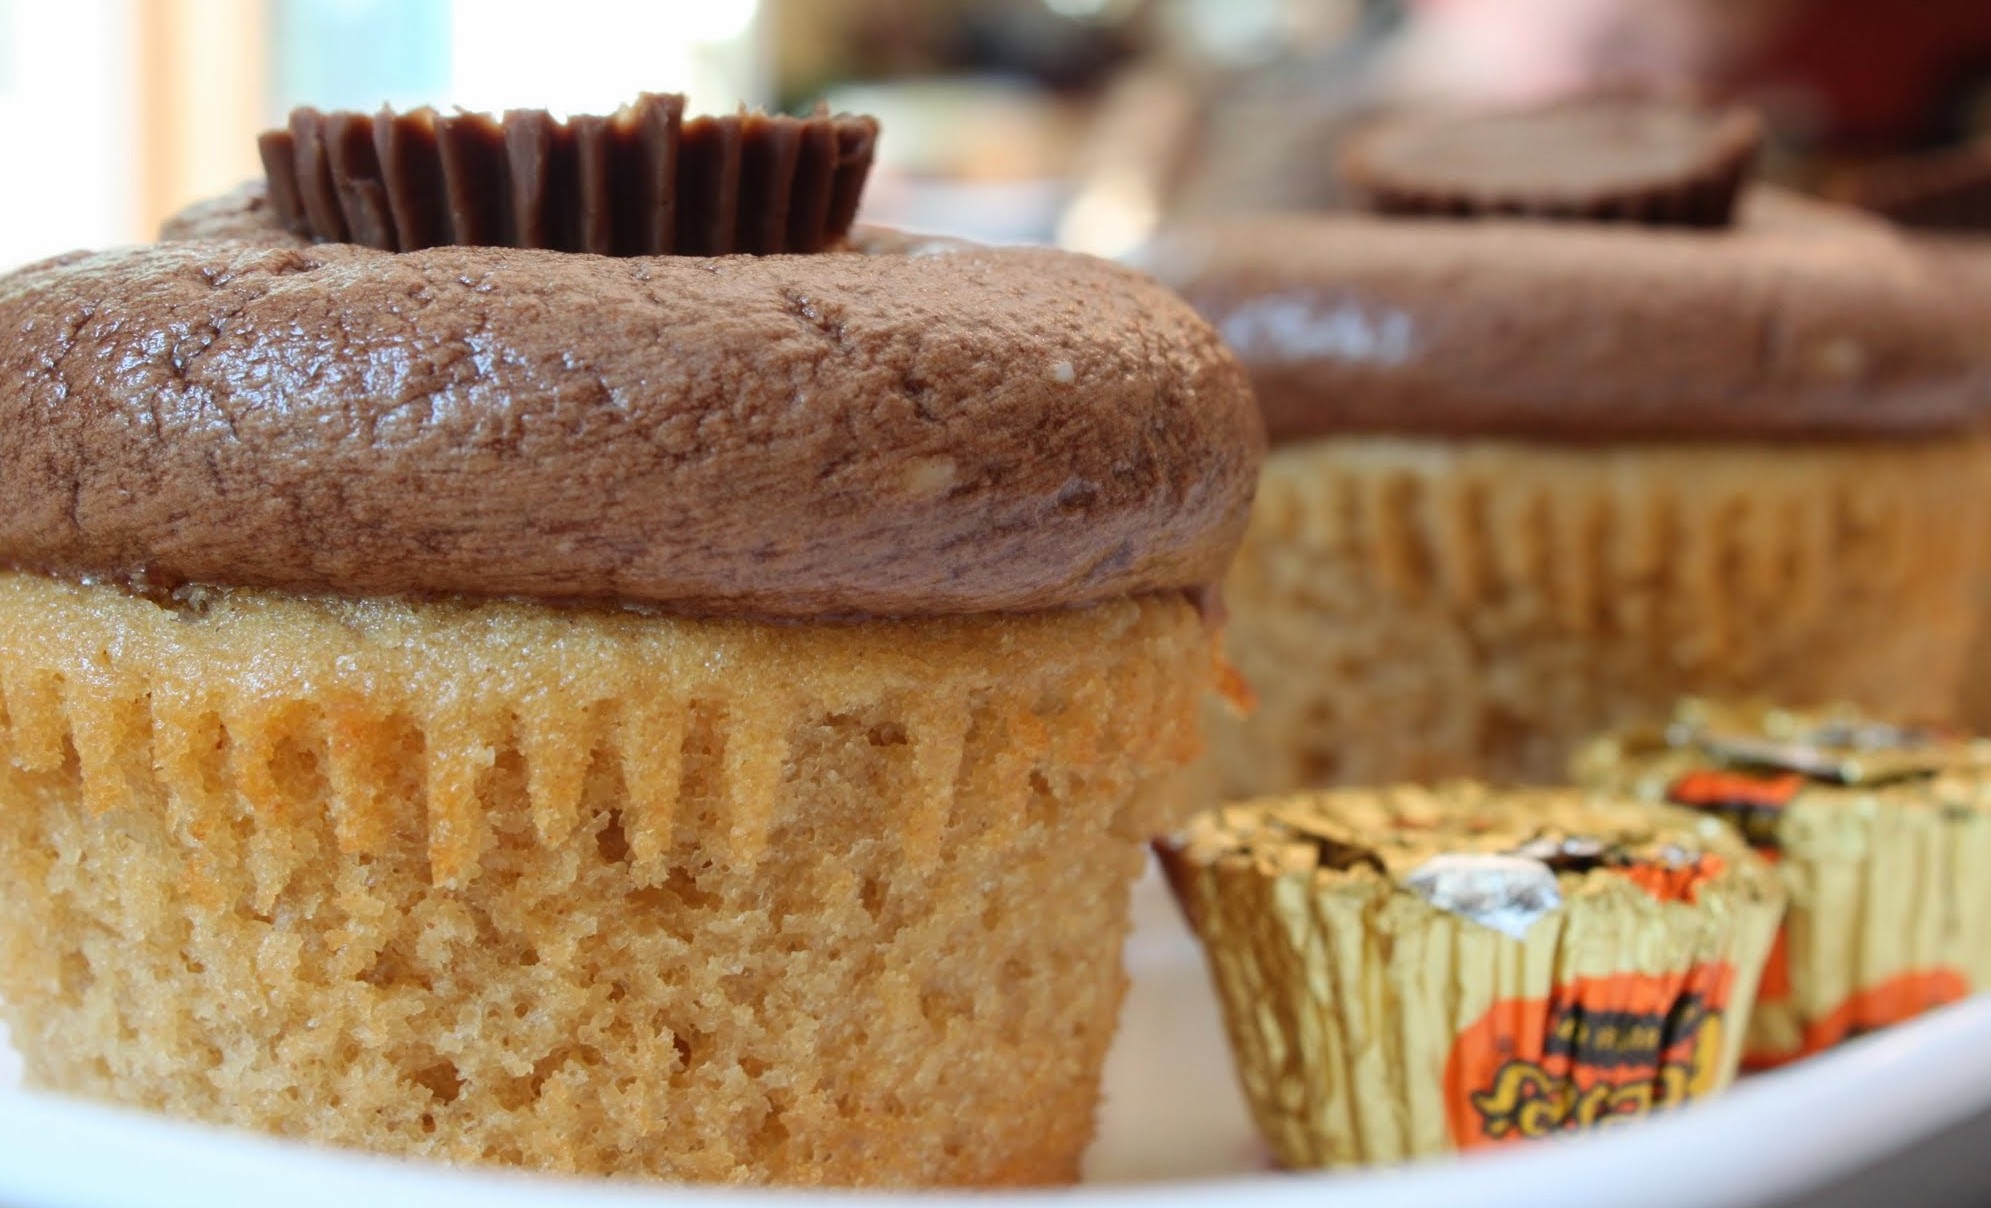 Double Peanut Butter Cup Cupcakes